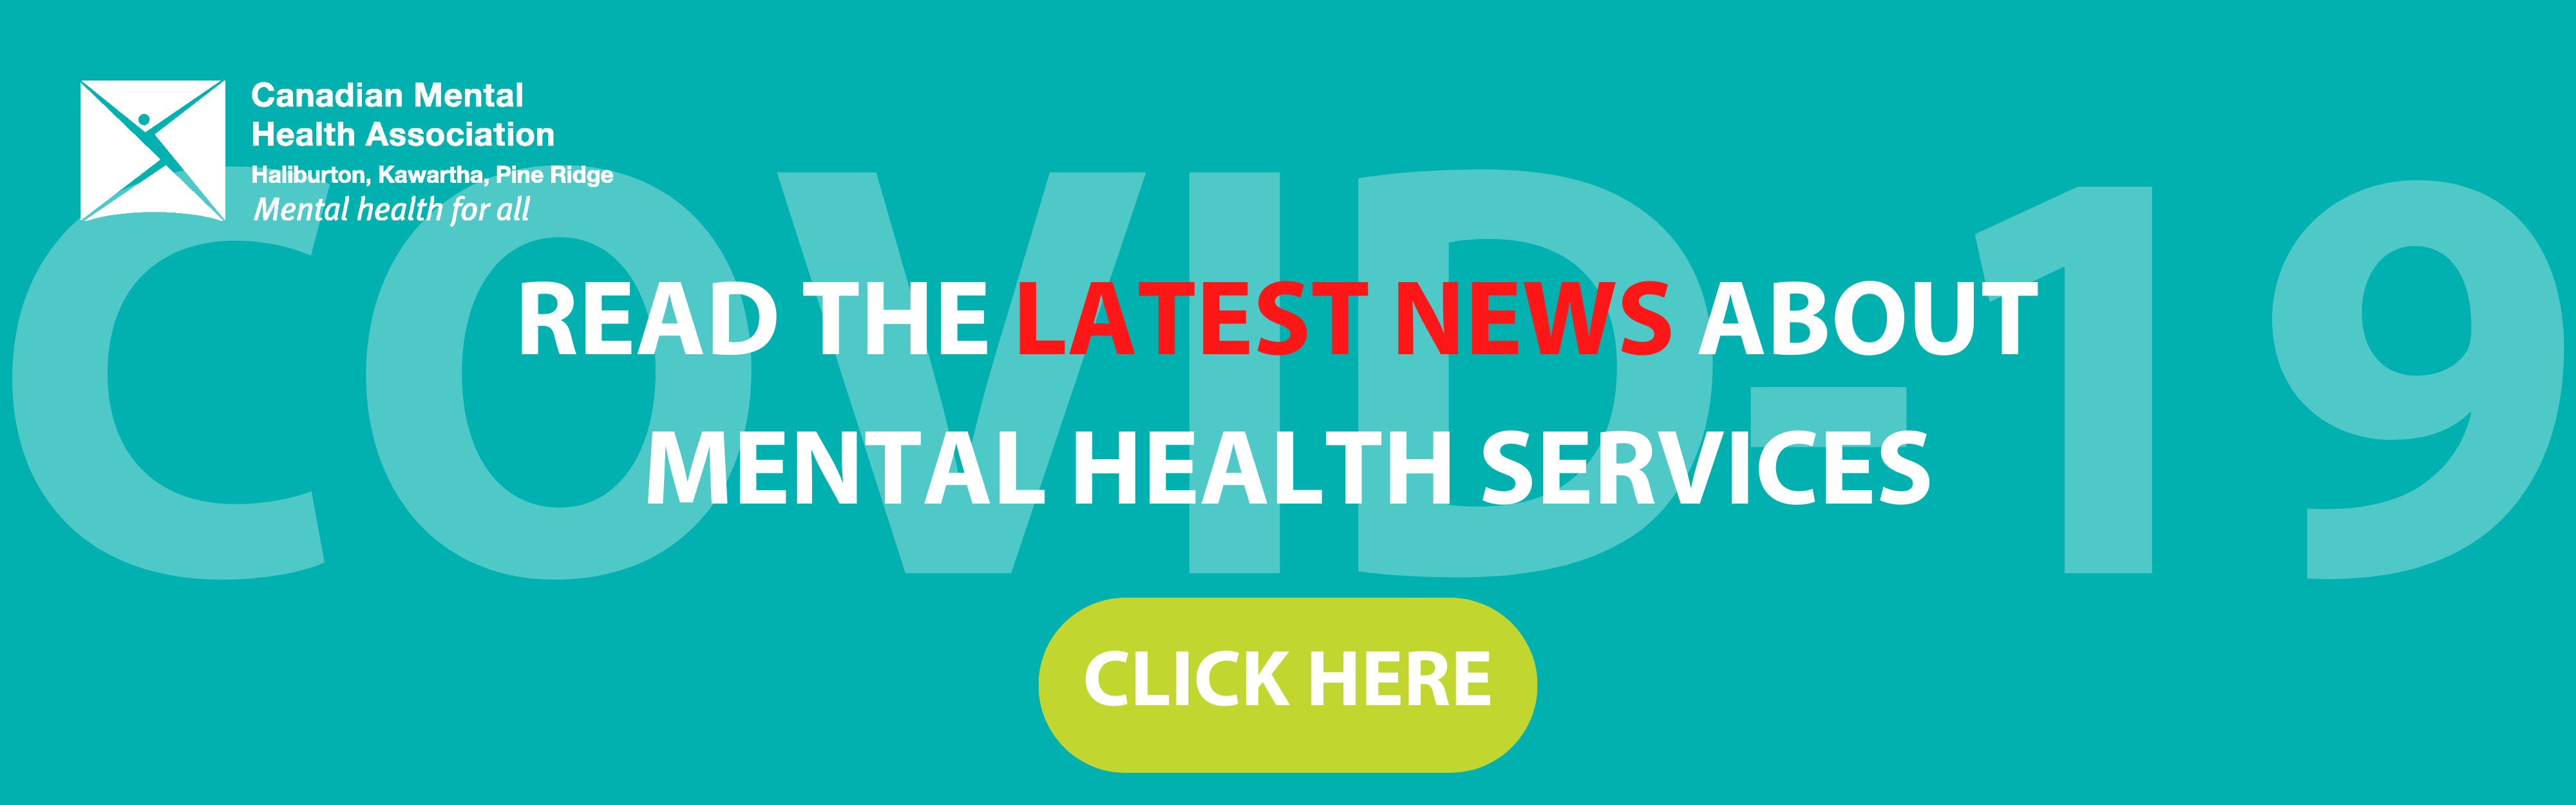 COVID-19 Mental Health Services Updates